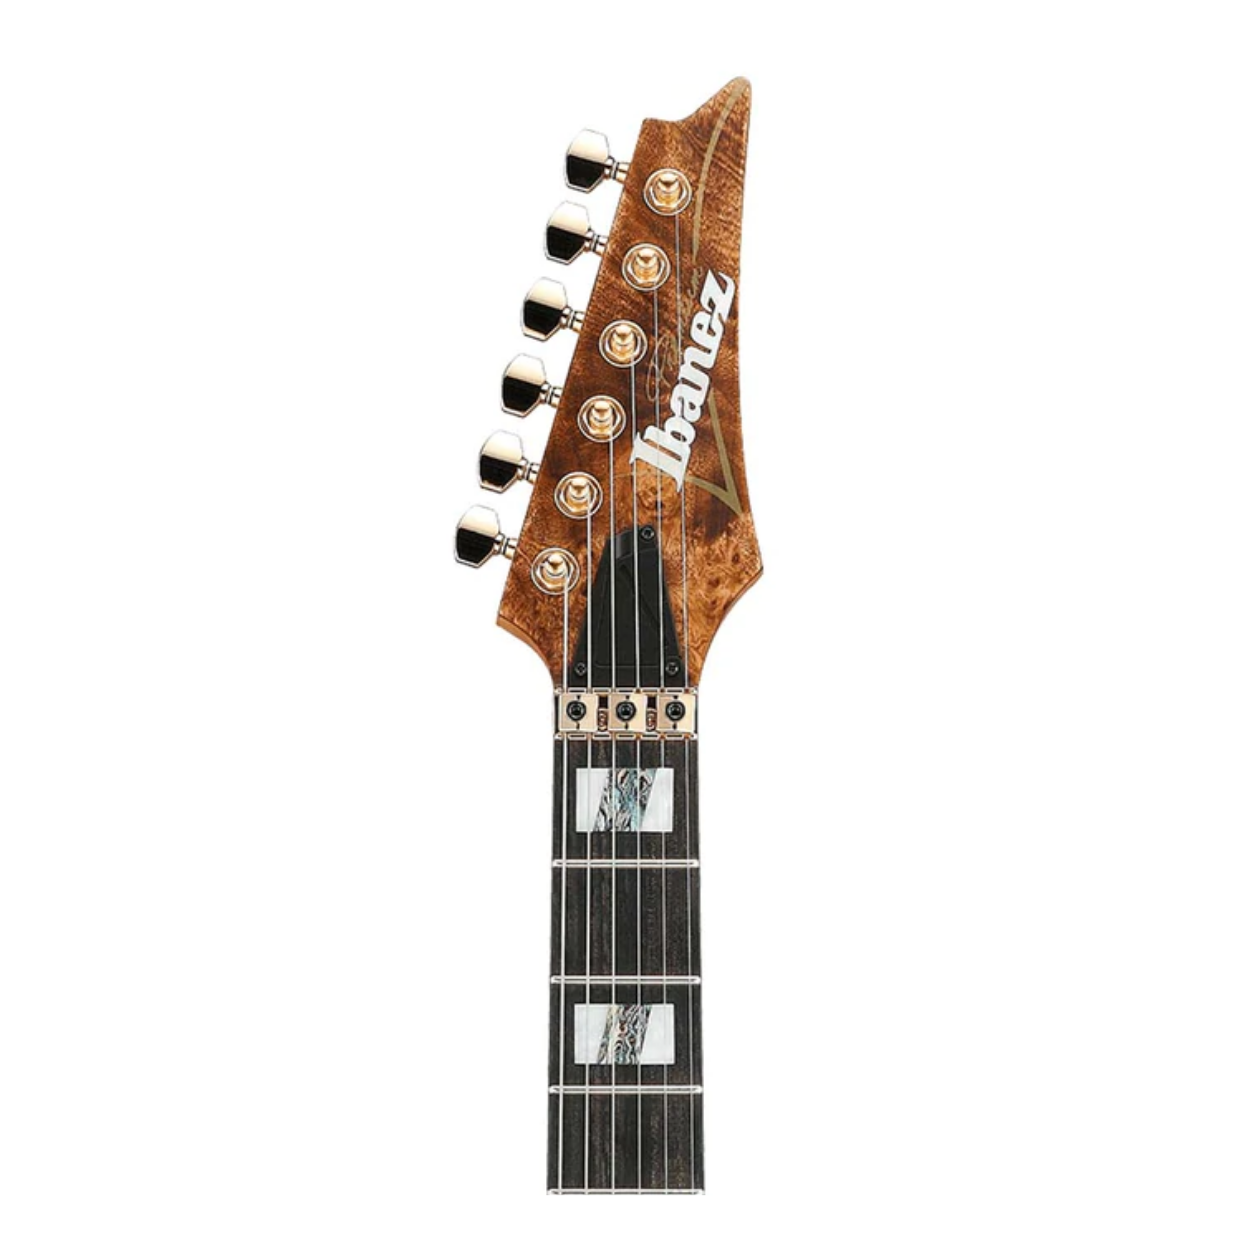 Ibanez Premium Rgt1220pb Electric Guitar, Antique Brown Stained